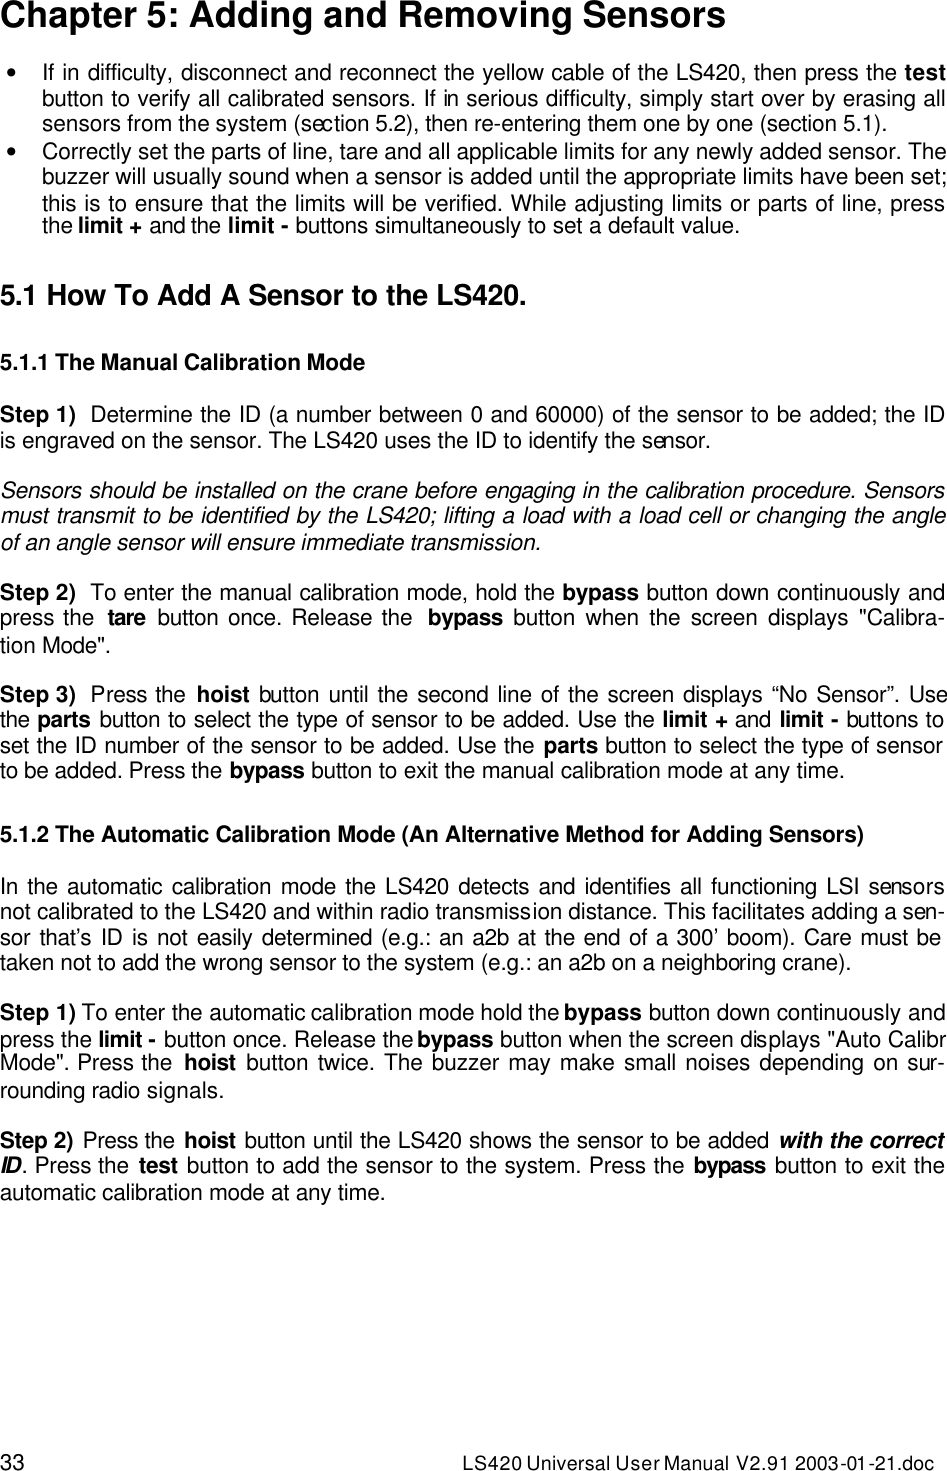 33 LS420 Universal User Manual V2.91 2003-01 -21.doc Chapter 5: Adding and Removing Sensors  • If in difficulty, disconnect and reconnect the yellow cable of the LS420, then press the test button to verify all calibrated sensors. If in serious difficulty, simply start over by erasing all sensors from the system (section 5.2), then re-entering them one by one (section 5.1).  • Correctly set the parts of line, tare and all applicable limits for any newly added sensor. The buzzer will usually sound when a sensor is added until the appropriate limits have been set; this is to ensure that the limits will be verified. While adjusting limits or parts of line, press the limit + and the limit - buttons simultaneously to set a default value.   5.1 How To Add A Sensor to the LS420.  5.1.1 The Manual Calibration Mode  Step 1) Determine the ID (a number between 0 and 60000) of the sensor to be added; the ID is engraved on the sensor. The LS420 uses the ID to identify the sensor.  Sensors should be installed on the crane before engaging in the calibration procedure. Sensors must transmit to be identified by the LS420; lifting a load with a load cell or changing the angle of an angle sensor will ensure immediate transmission.   Step 2) To enter the manual calibration mode, hold the bypass button down continuously and press the  tare button once. Release the  bypass button when the screen displays &quot;Calibra-tion Mode&quot;.  Step 3) Press the hoist button until the second line of the screen displays “No Sensor”. Use the parts button to select the type of sensor to be added. Use the limit + and limit - buttons to set the ID number of the sensor to be added. Use the parts button to select the type of sensor to be added. Press the bypass button to exit the manual calibration mode at any time.    5.1.2 The Automatic Calibration Mode (An Alternative Method for Adding Sensors)  In the automatic calibration mode the LS420 detects and identifies all functioning LSI sensors not calibrated to the LS420 and within radio transmission distance. This facilitates adding a sen-sor that’s ID is not easily determined (e.g.: an a2b at the end of a 300’ boom). Care must be taken not to add the wrong sensor to the system (e.g.: an a2b on a neighboring crane).  Step 1) To enter the automatic calibration mode hold the bypass button down continuously and press the limit - button once. Release the bypass button when the screen displays &quot;Auto Calibr Mode&quot;. Press the  hoist button twice. The buzzer may make small noises depending on sur-rounding radio signals.  Step 2) Press the hoist button until the LS420 shows the sensor to be added with the correct ID. Press the test button to add the sensor to the system. Press the bypass button to exit the automatic calibration mode at any time.   